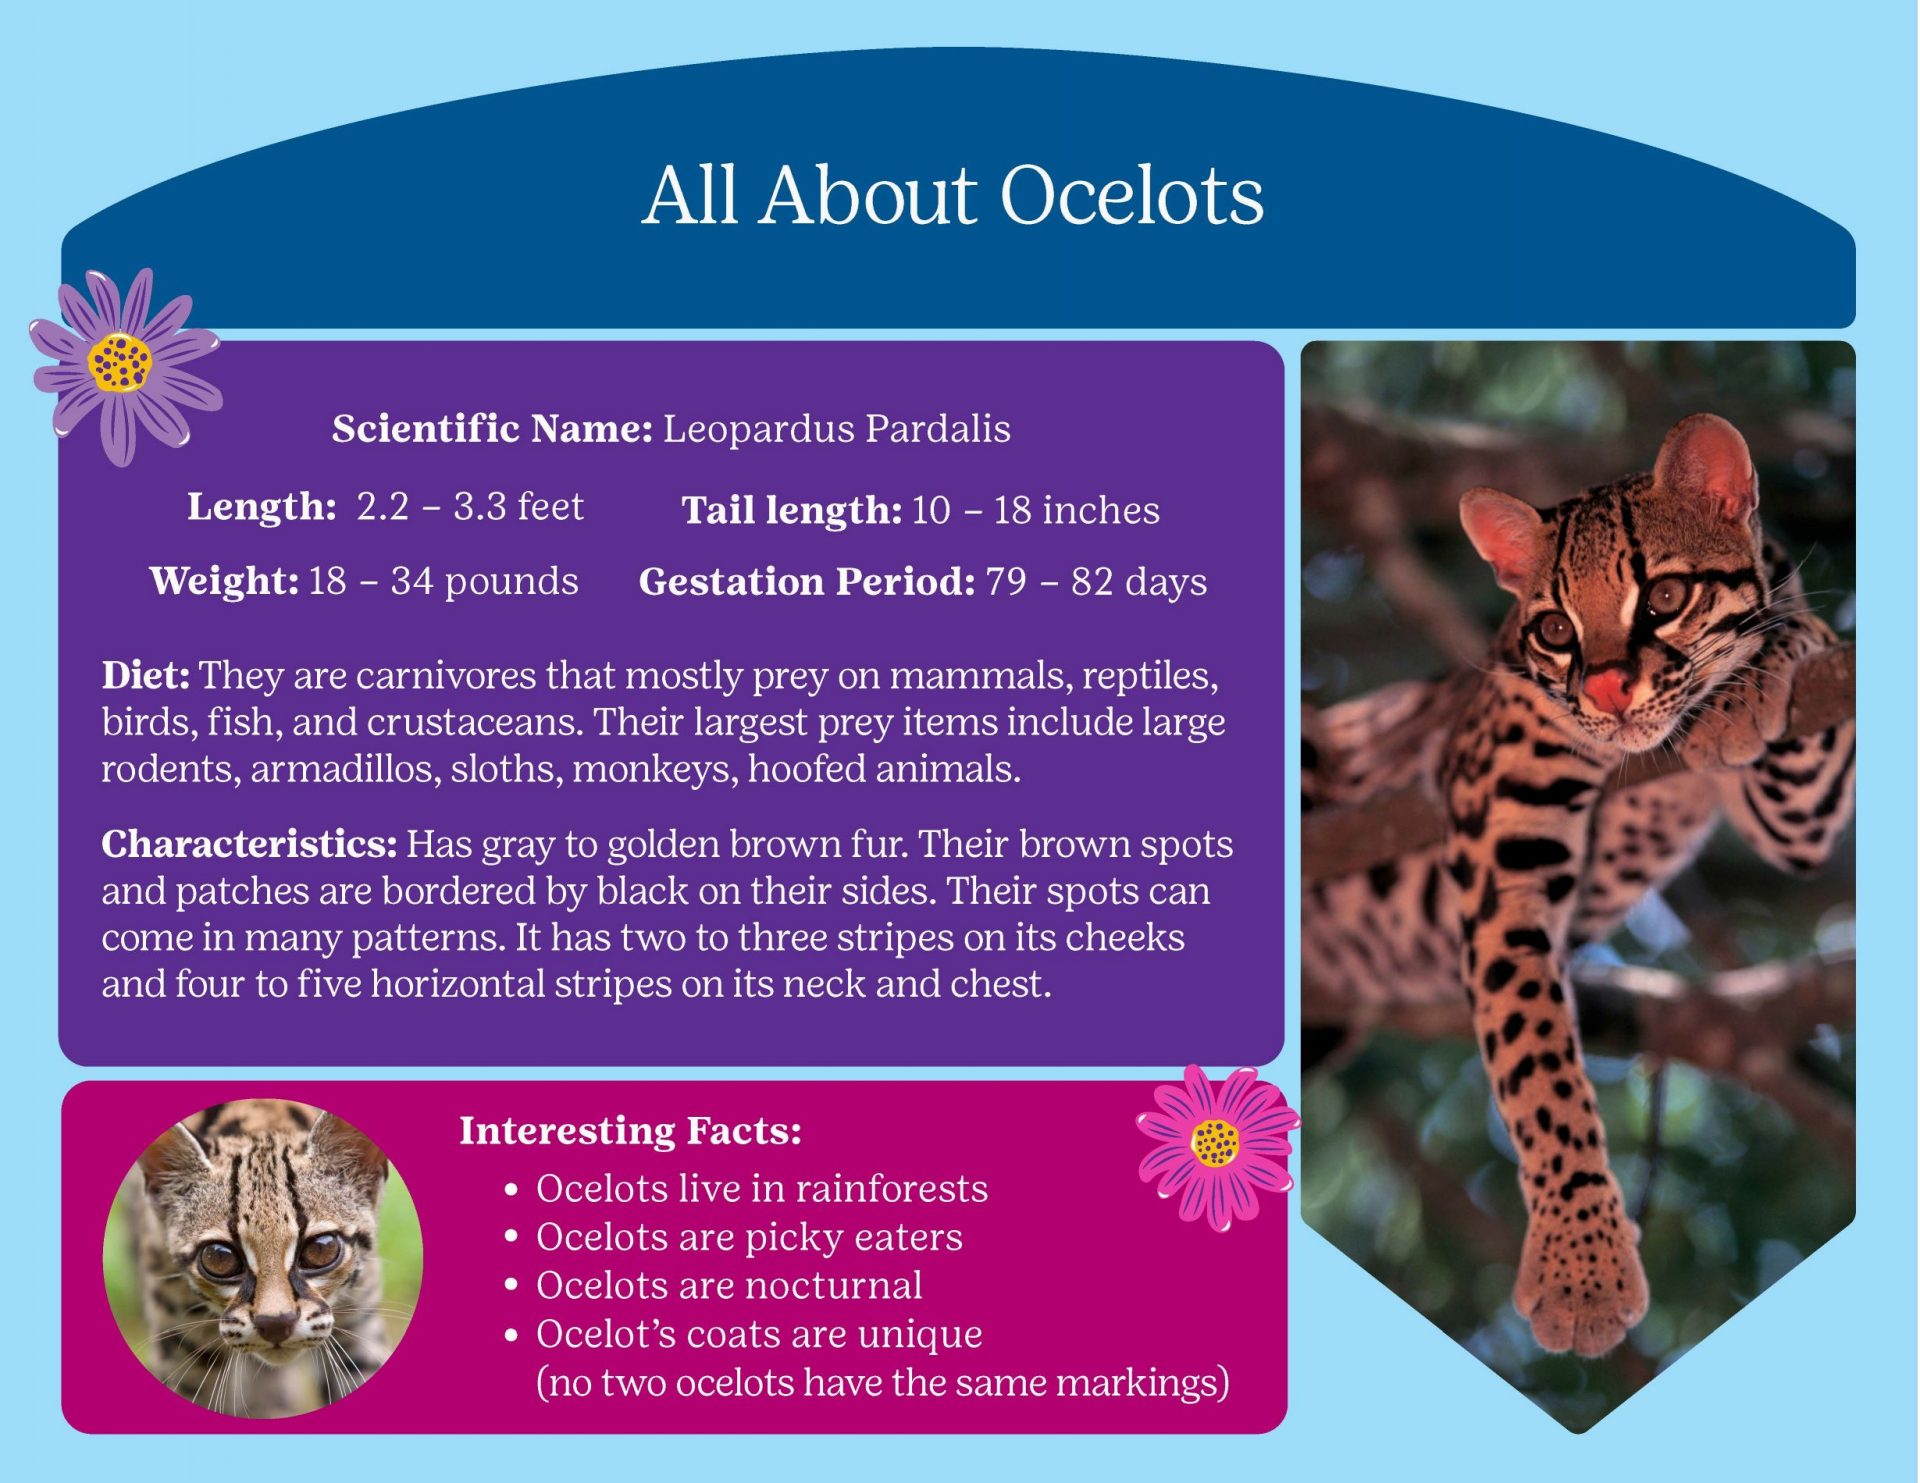 All About Ocelots